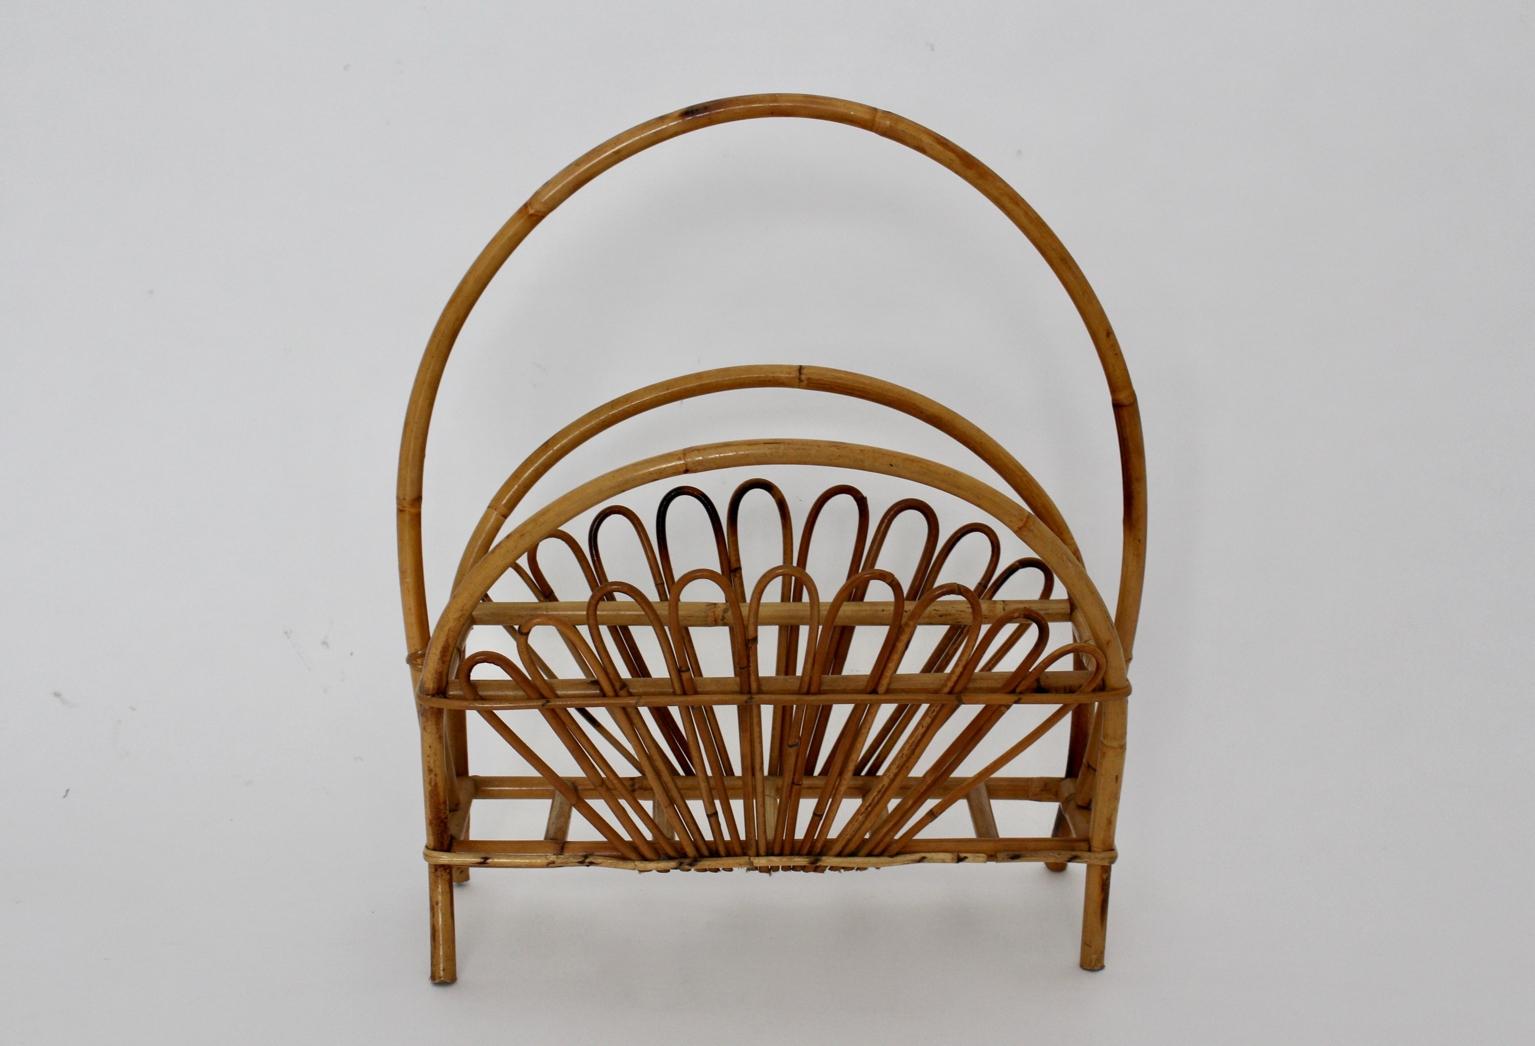 A charming mid century modern Vintage Riviera style magazine rack from the 1950s, Italy, which was made of rattan.

approx. measures:
Width 52 cm
Depth 25.5 cm
Height 60 cm
Very good condition without damages or defects.
    
